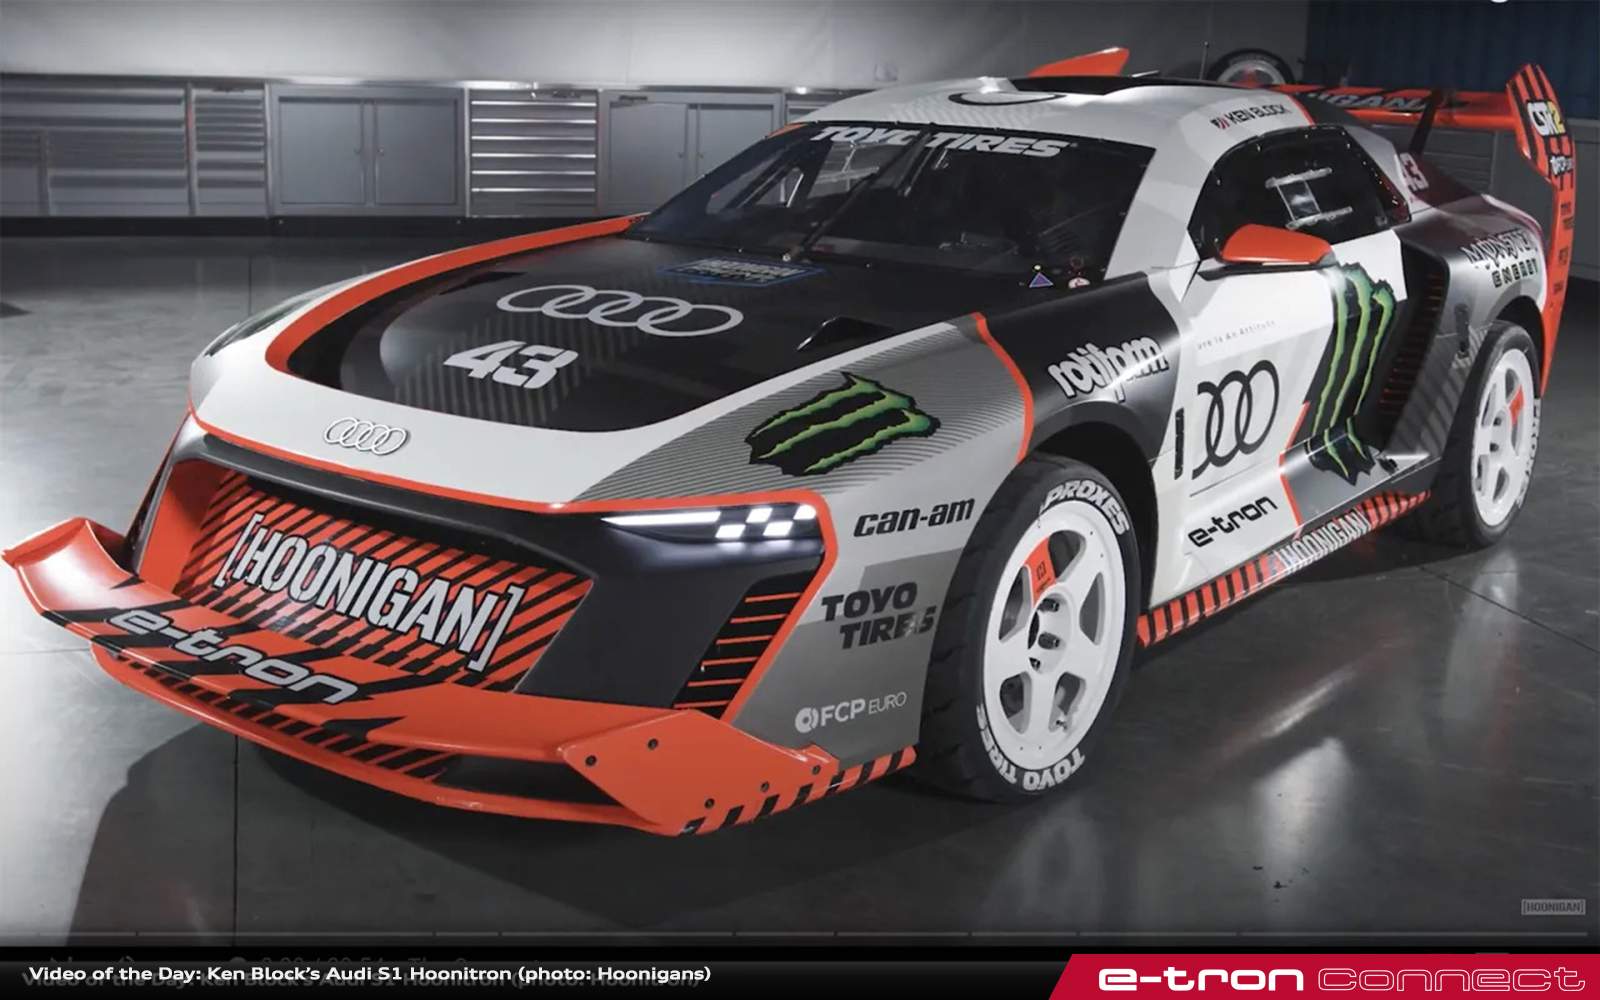 Video of the Day: Ken Block's Audi S1 Hoonitron - e-tron connect